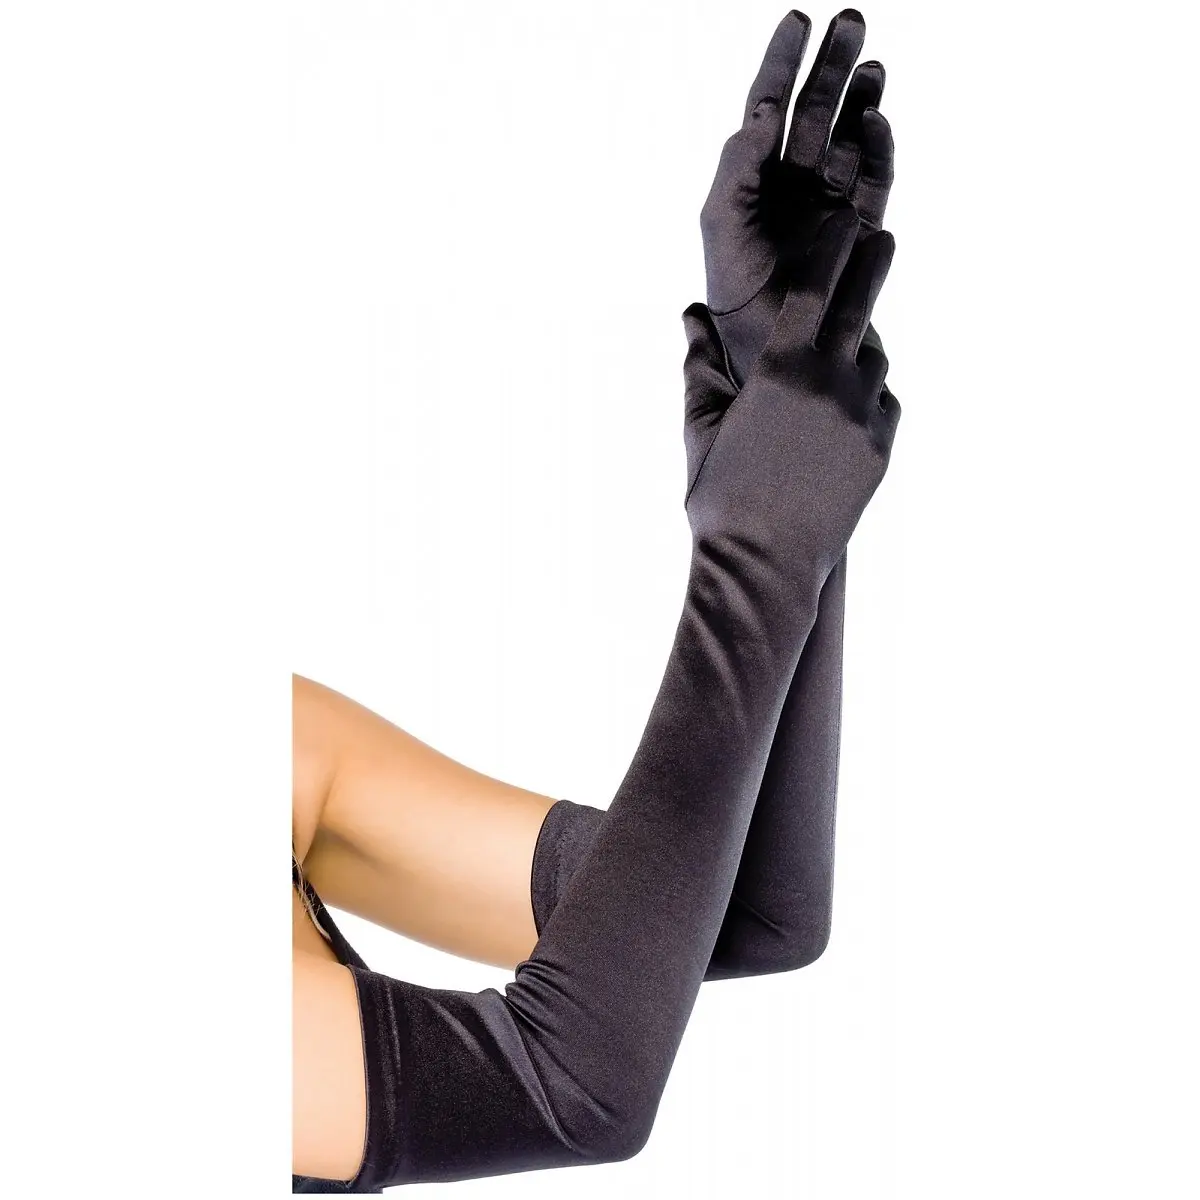 Toyl Long Satin Opera Gloves For Dress Up Cosplay Photo Props In